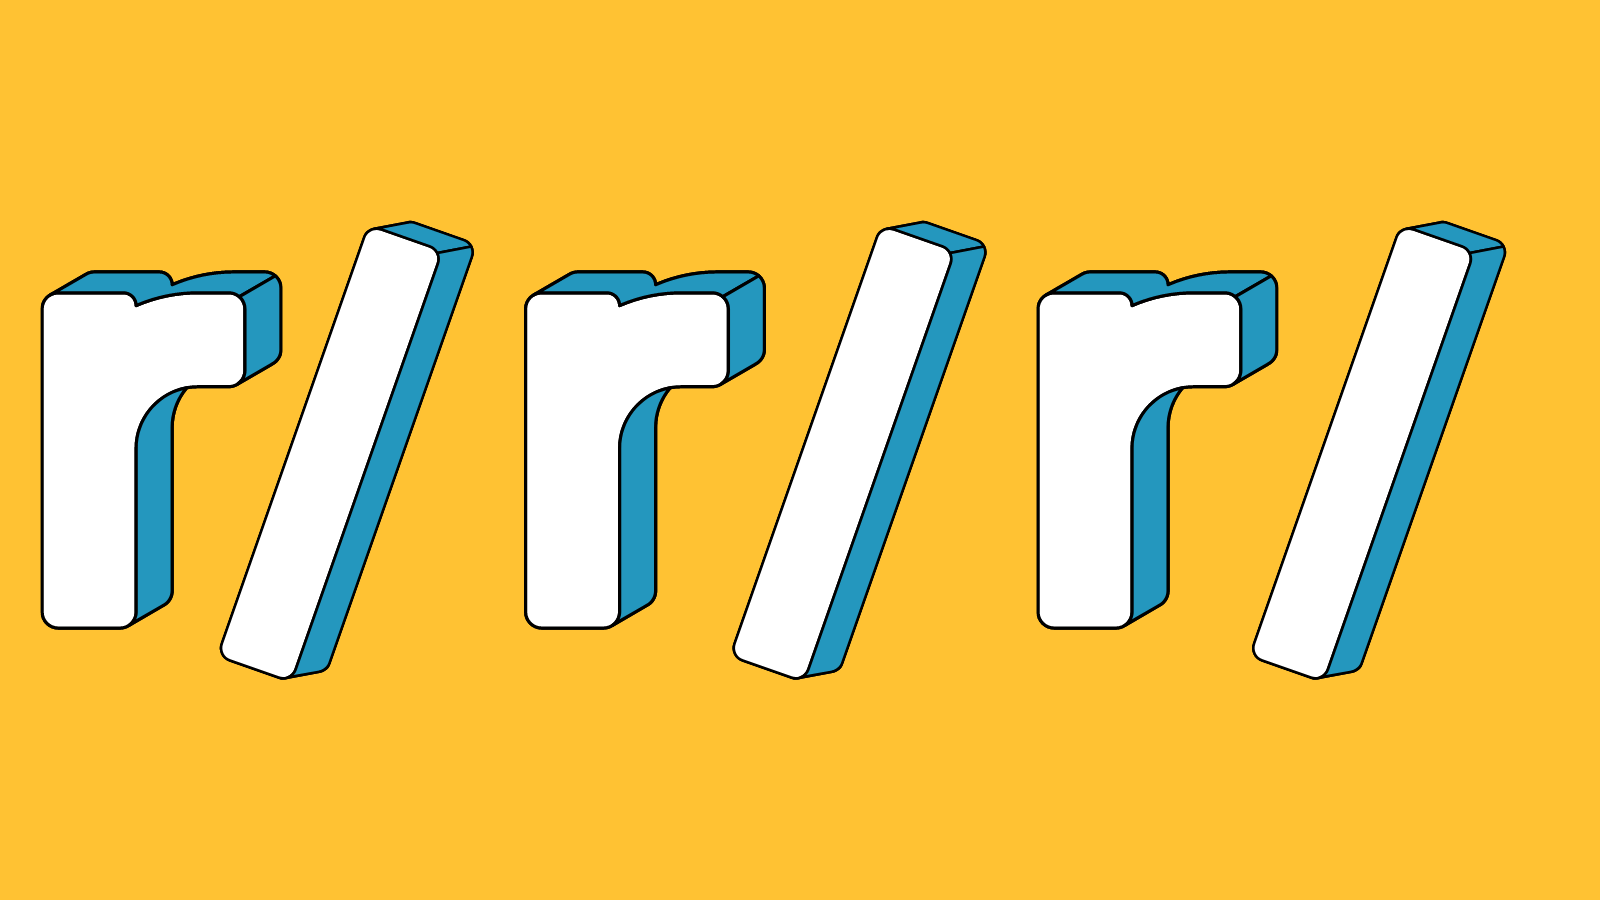 Three sets of "r/" in 3-D letters